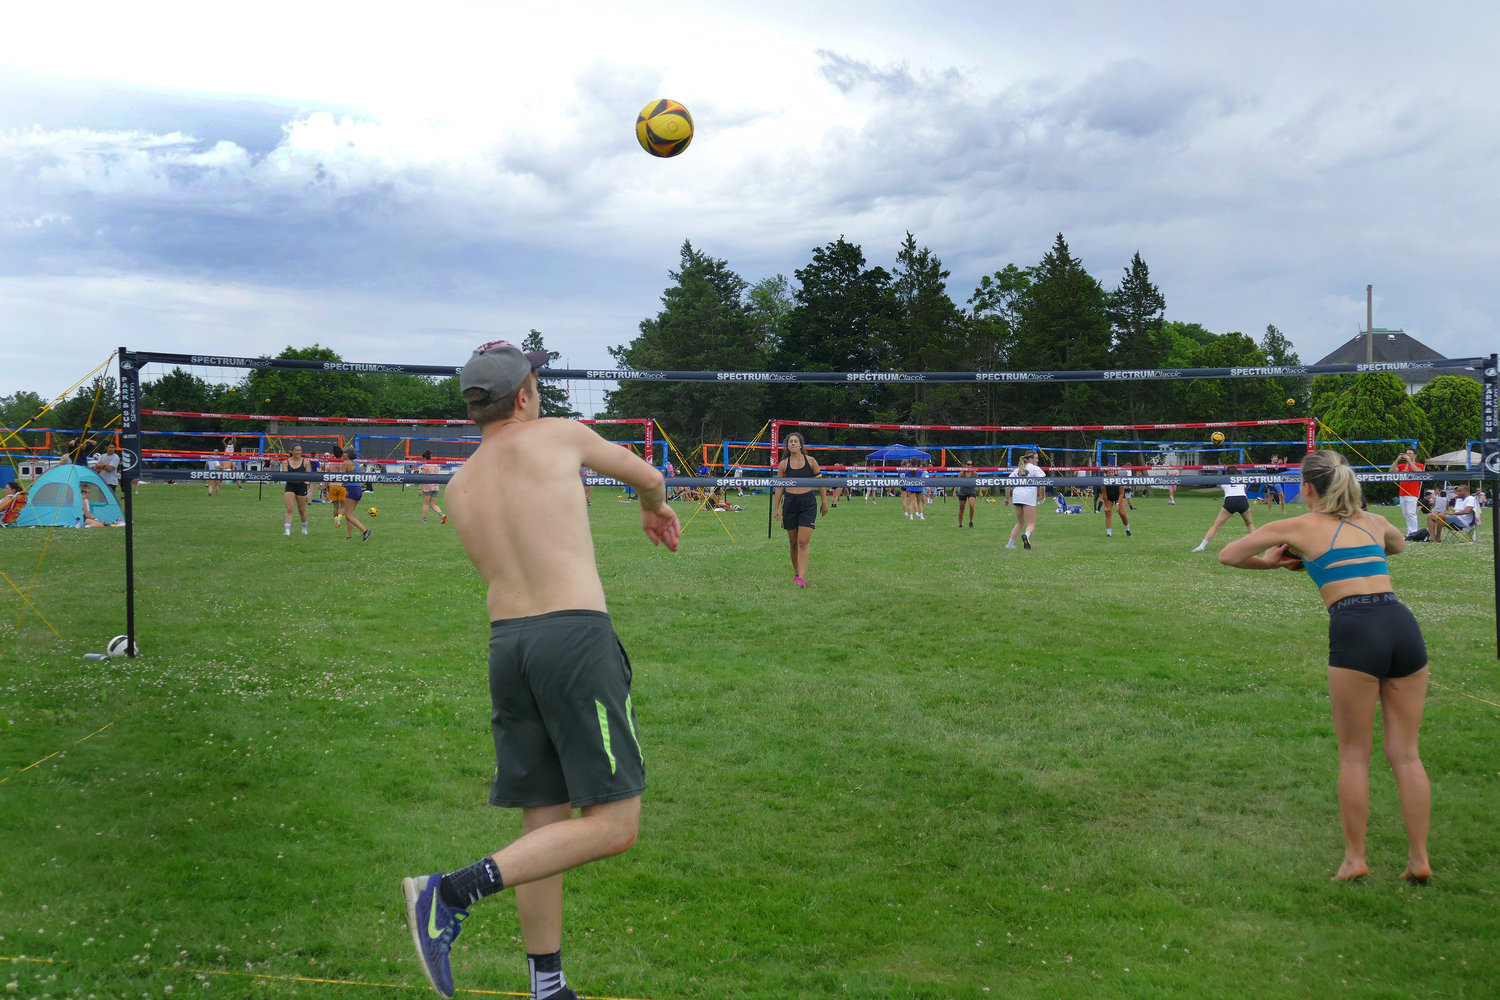 The grass volleyball tournament was an all day event that drew over 150 players.